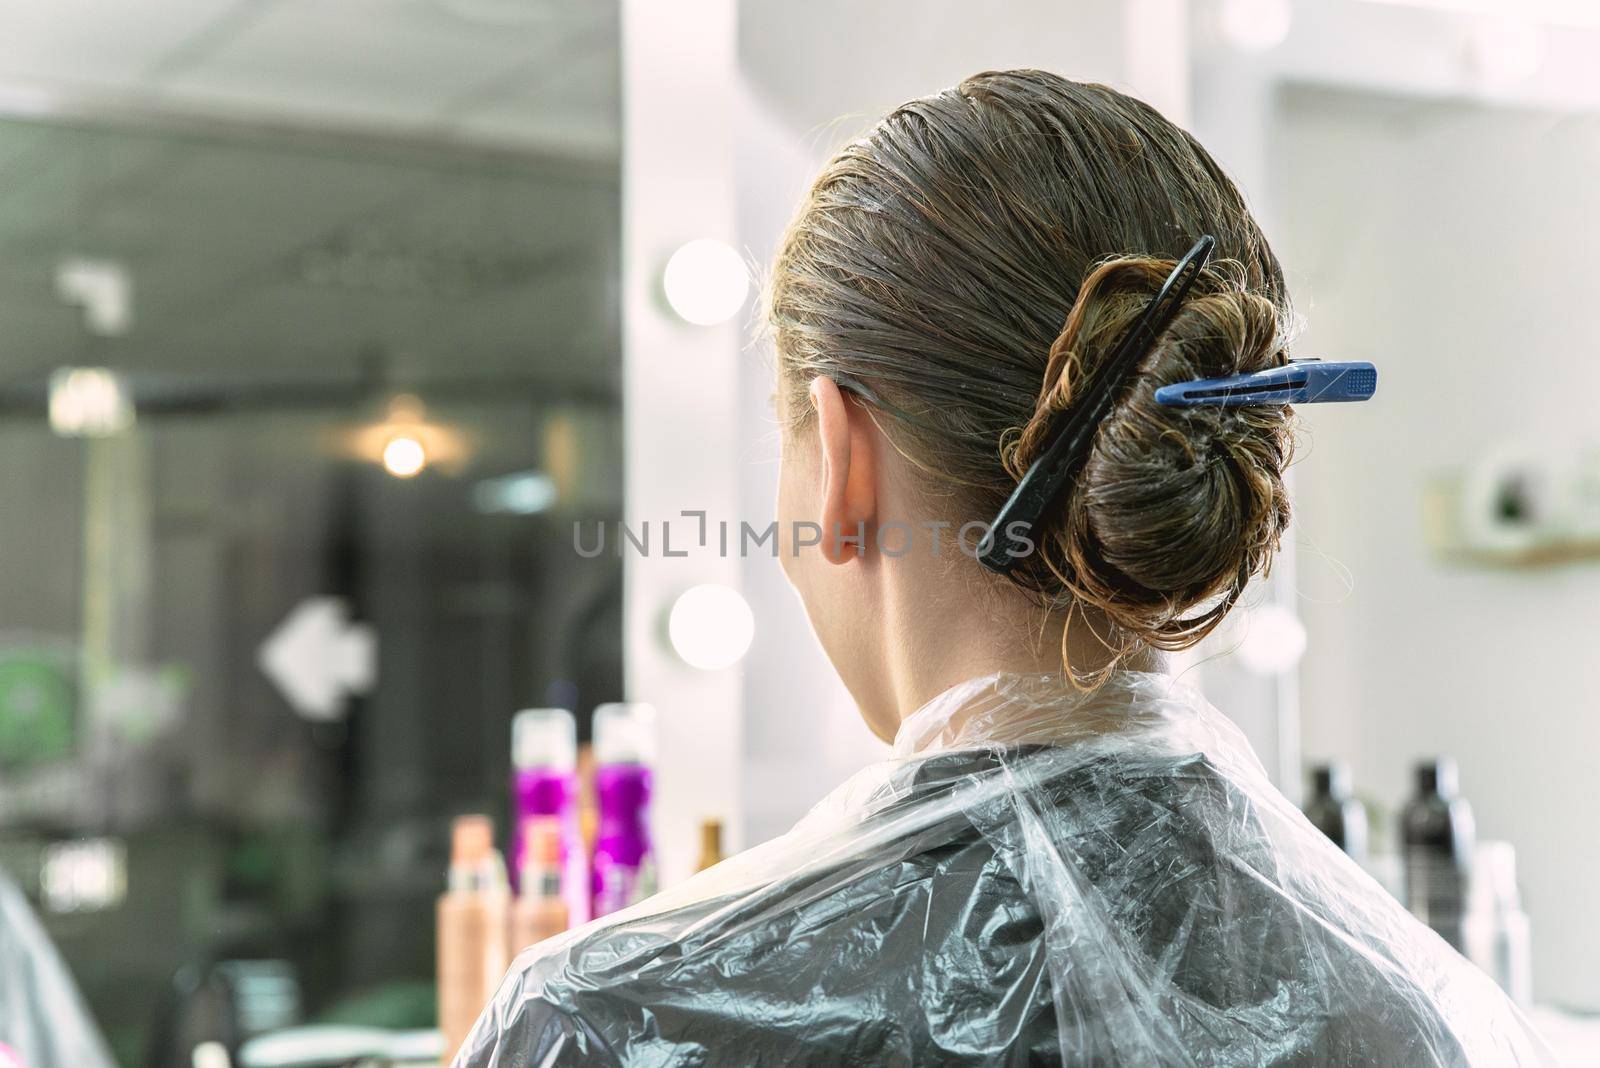 hair coloring in a beauty salon, young girl during dyeing process by Mariakray